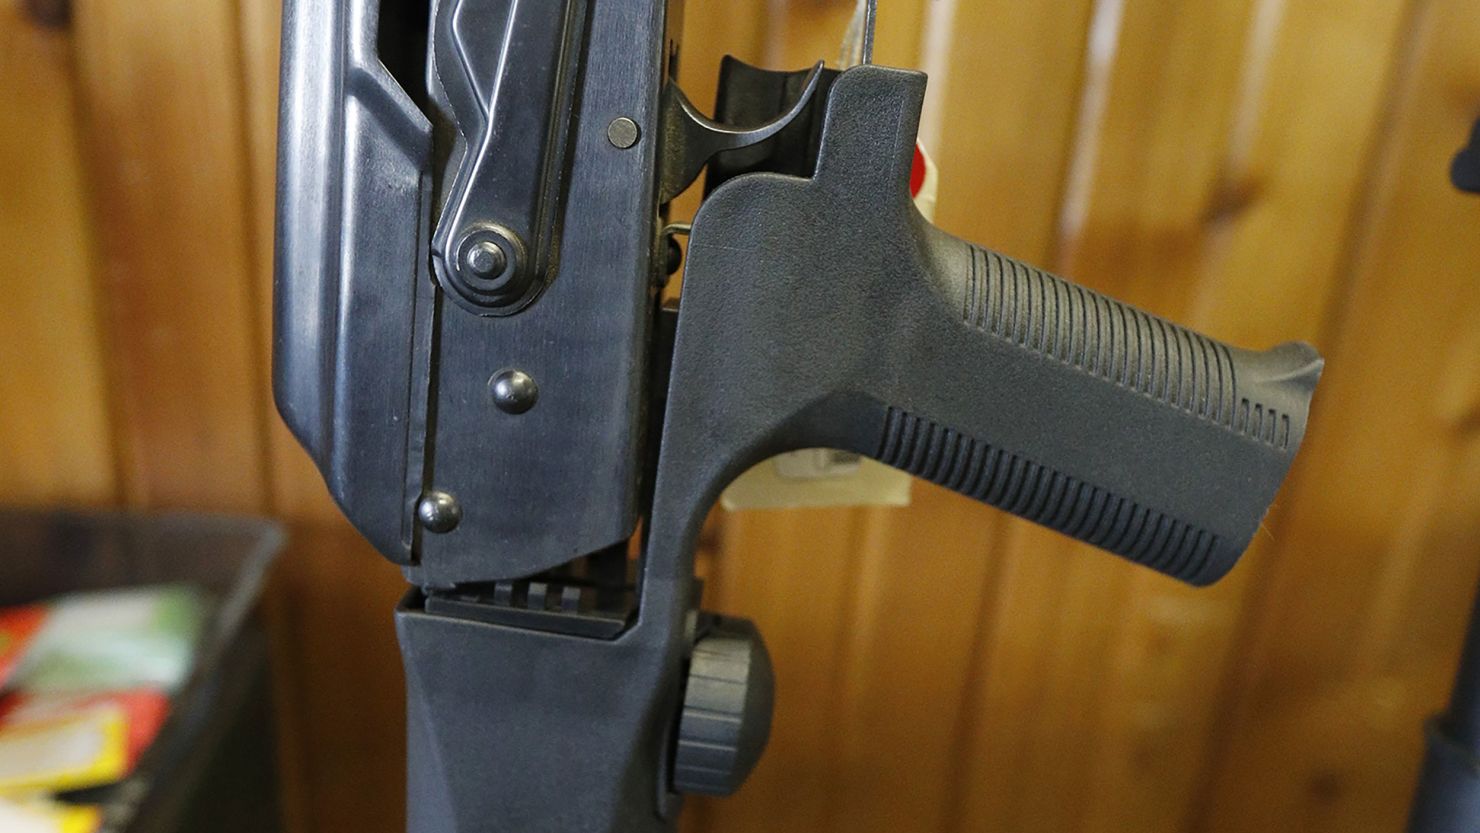  An AK-47 with a bump stock is shown.